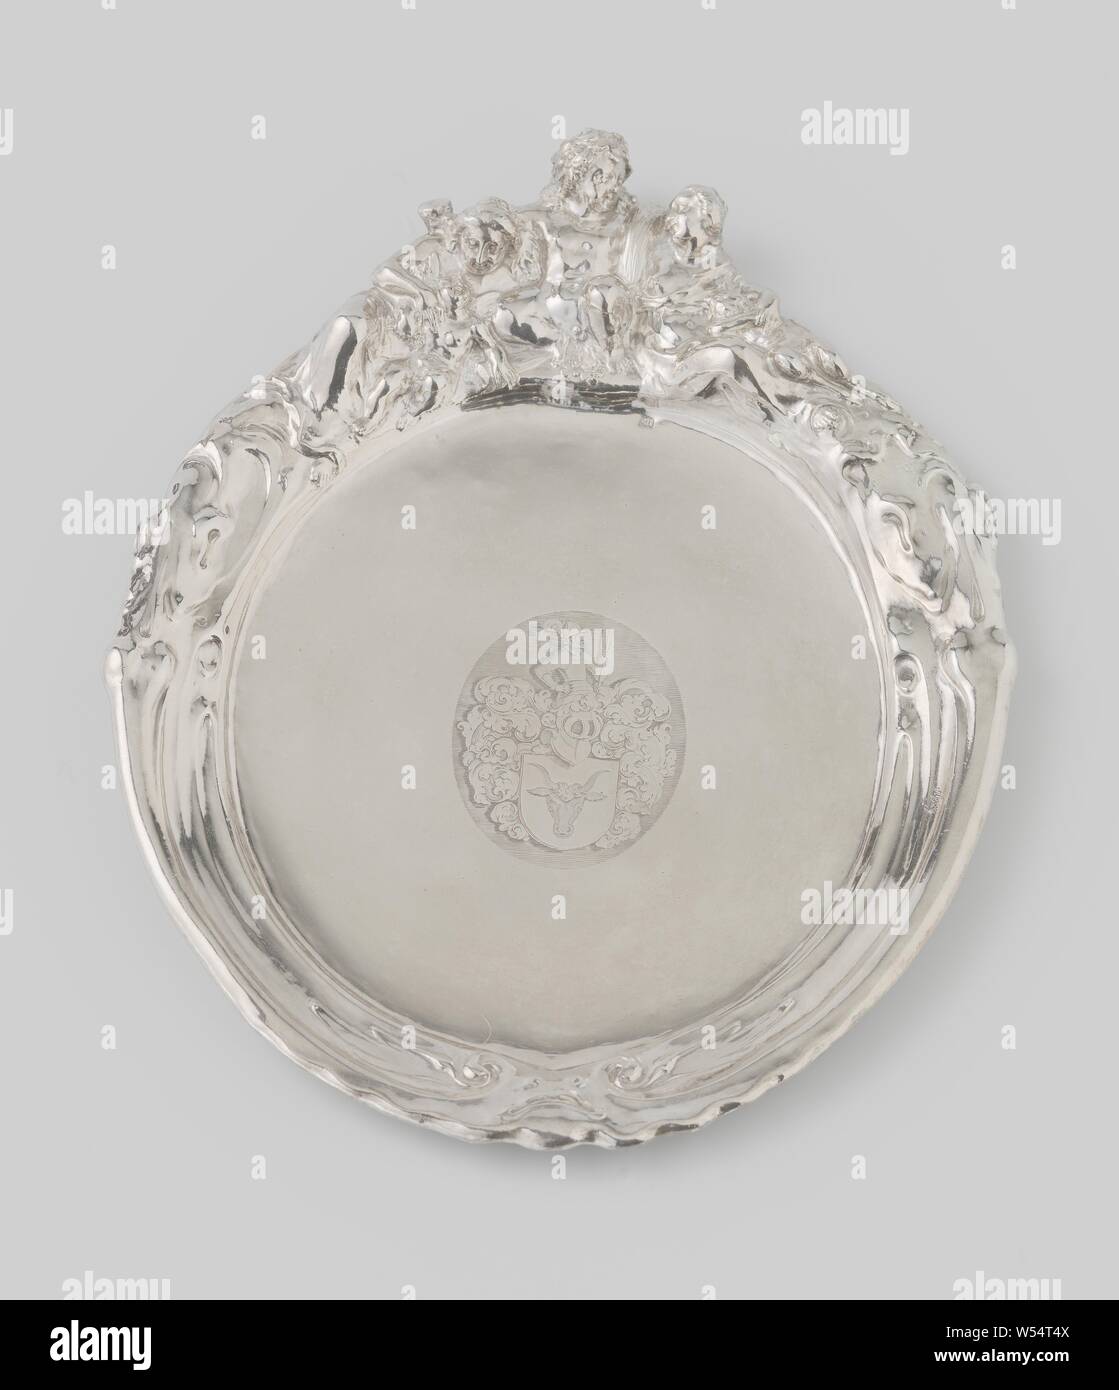 Drinking Bowl, Dish, Dish with lobe ornament border in which Bacchus, Venus, Amor, Ceres and Satyrkind, Oval dish of silver. On the smooth center piece a weapon, surrounded by a border of lobe ornament, in which Bacchus flanked by Venus with Amor and Ceres with Satyr child, auricular ornament, lobe style, ornament, (story of) Bacchus (Dionysus), Liber, (story of) Ceres (Demeter), (story of) Venus (Aphrodite), (story of) Cupid, Amor (Eros), Adam van Vianen (I), Utrecht, 1624, silver (metal), h 3.0 cm × w 25.5 cm × d 21.0 cm × w 370 Stock Photo